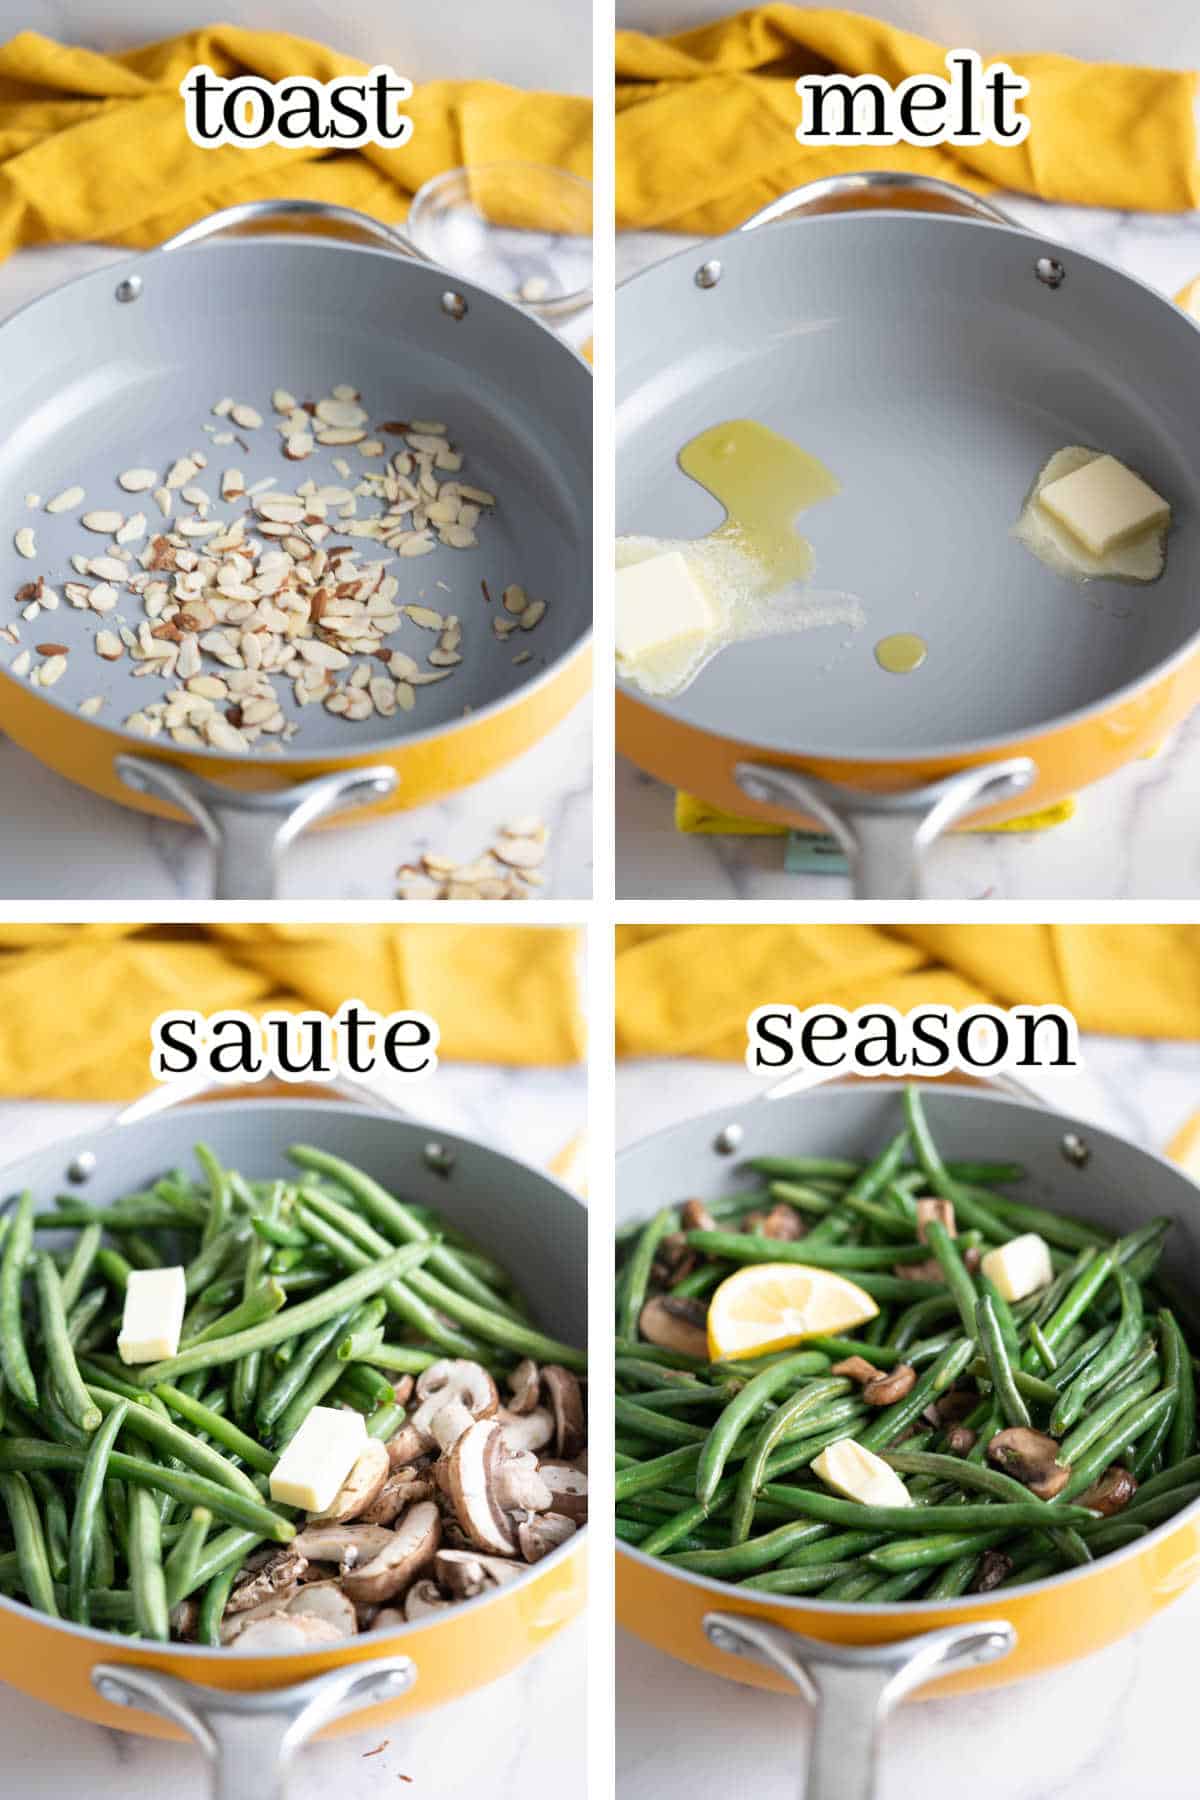 Step-by-step instructions to make the side dish recipe, with print overlay for clarification